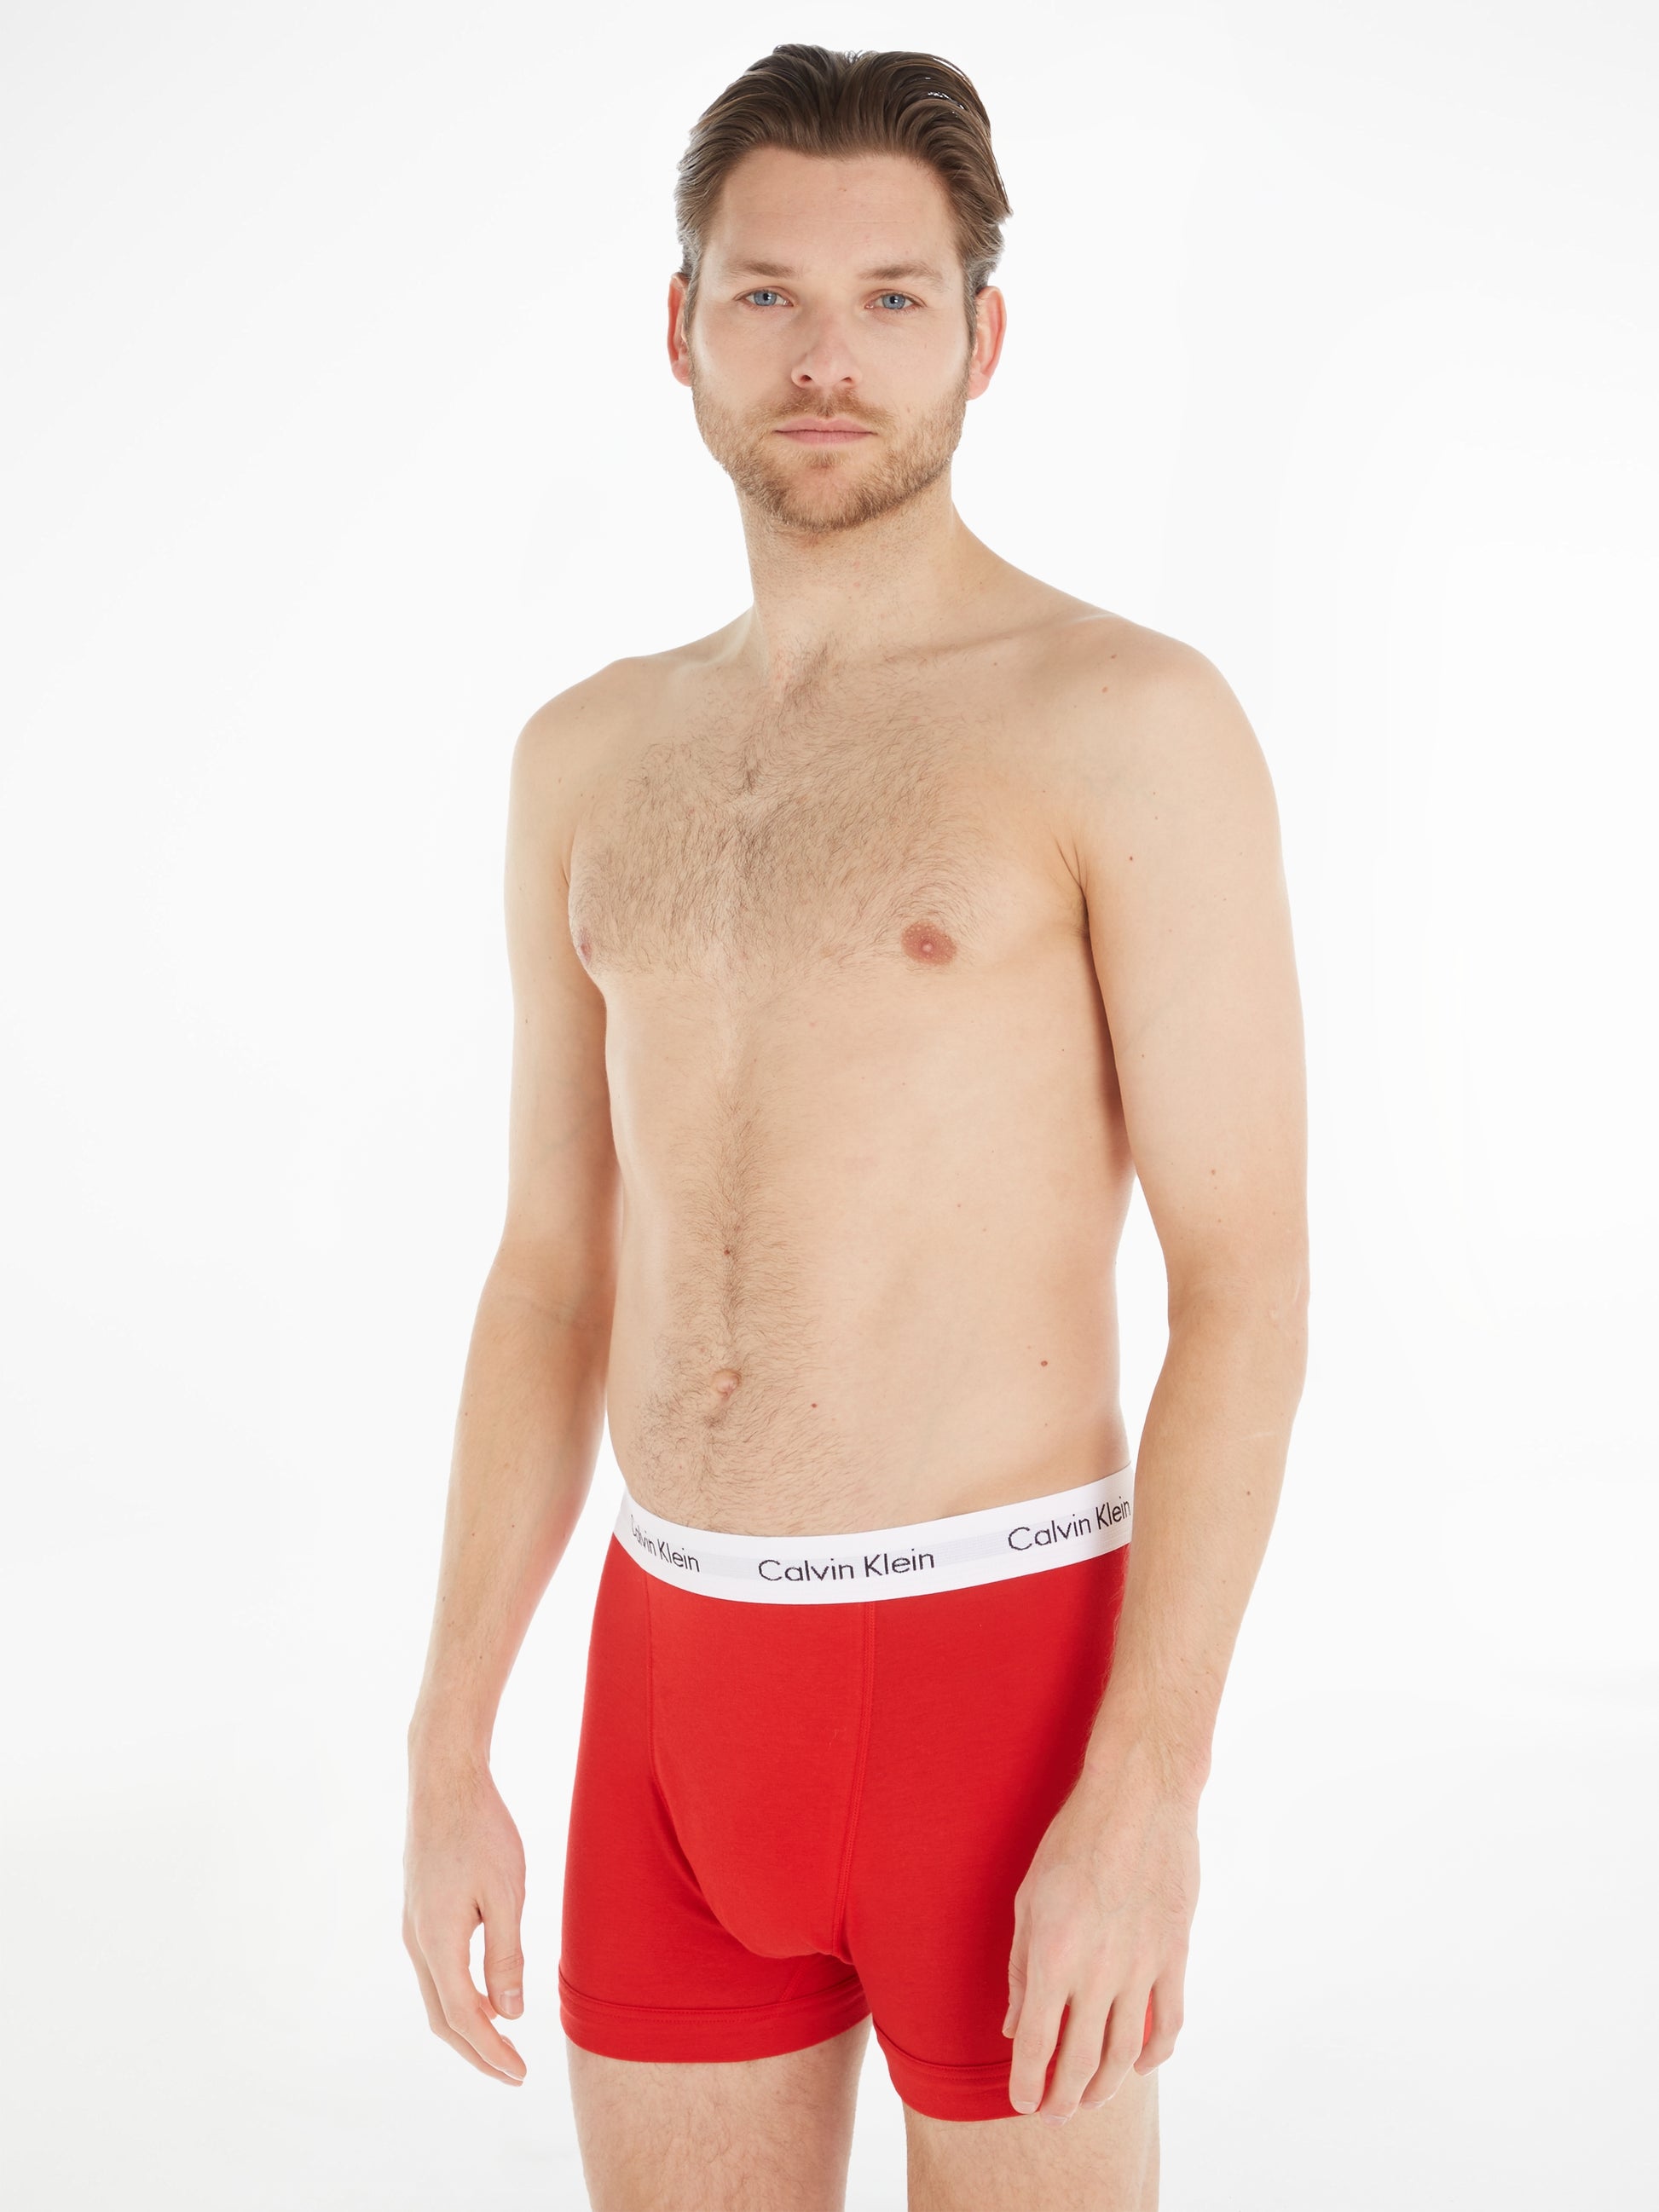 Calvin Klein 3 Pack Trunks Red White Blue with white waistband